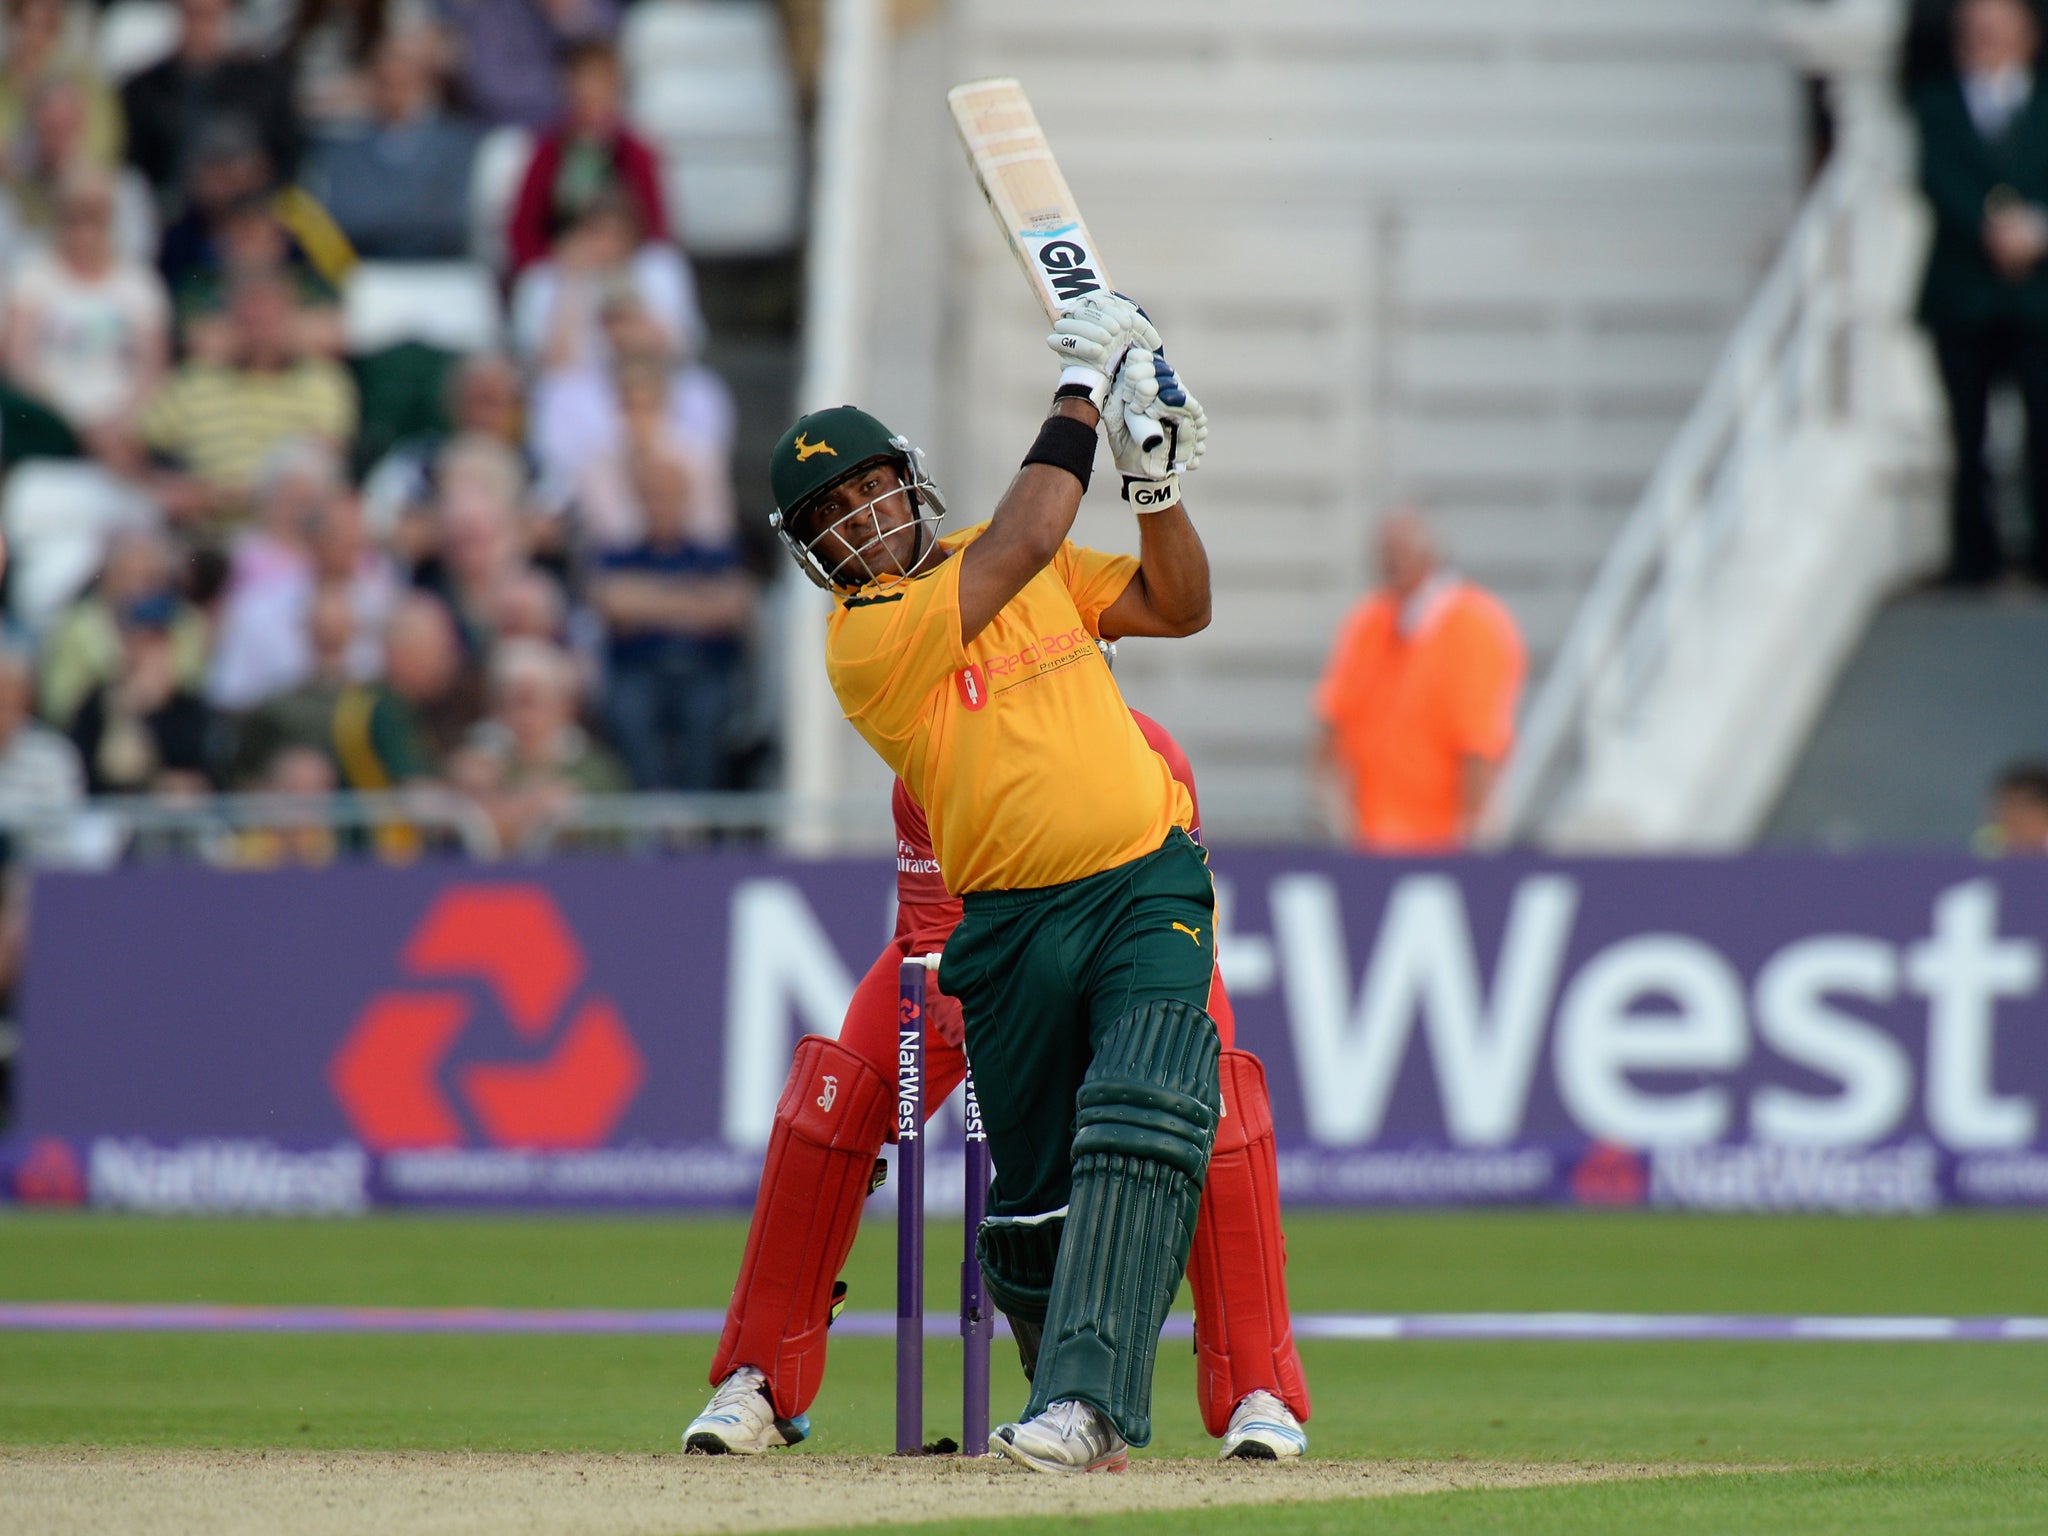 Samit Patel starred in Nottinghamshire's victory over Lancashire